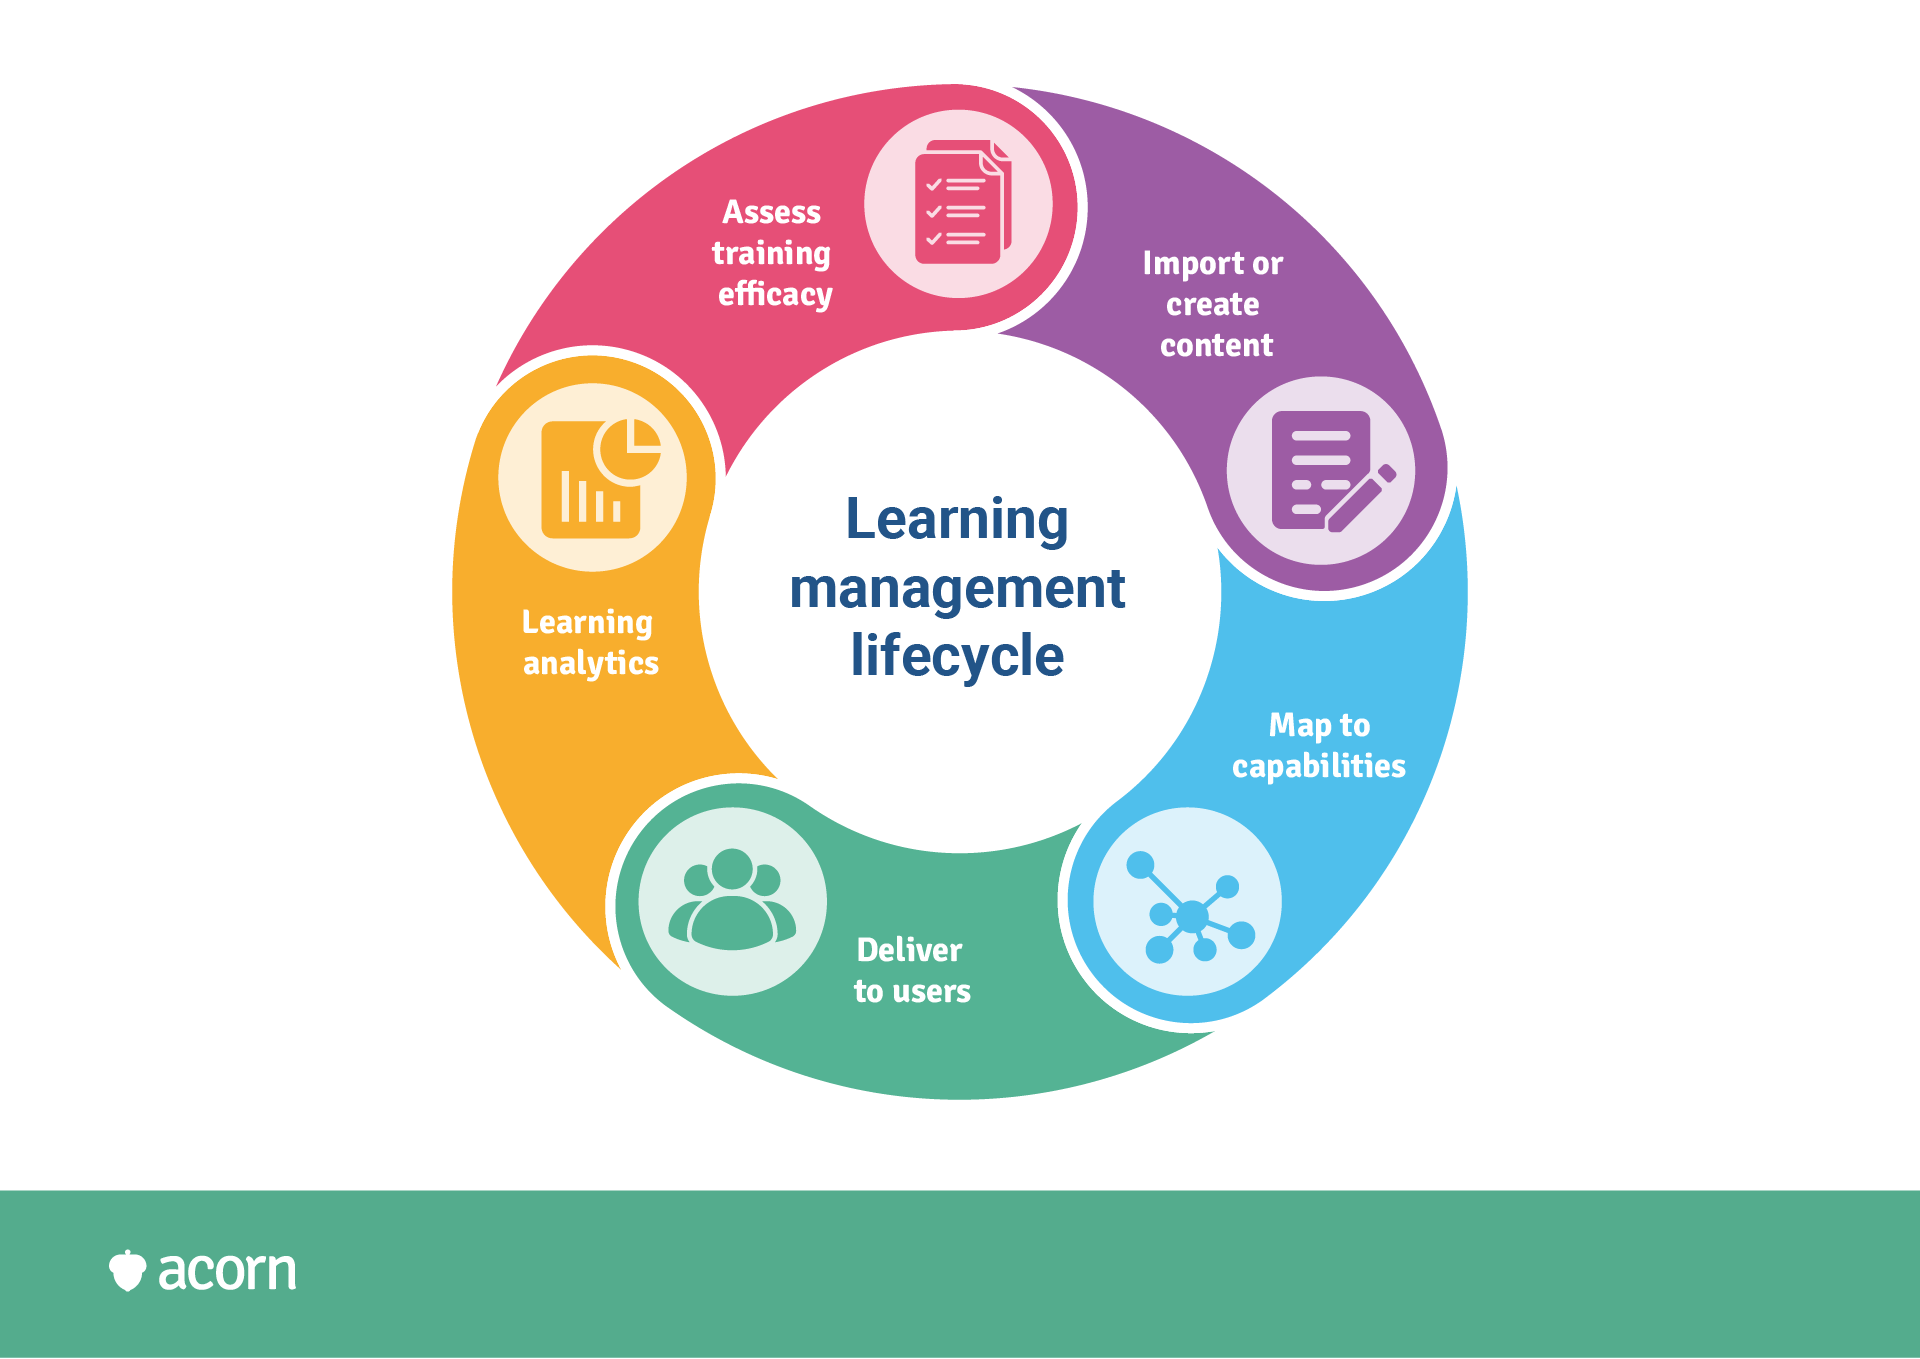 cyclical infographic depicting the learning management lifecycle in an LMS